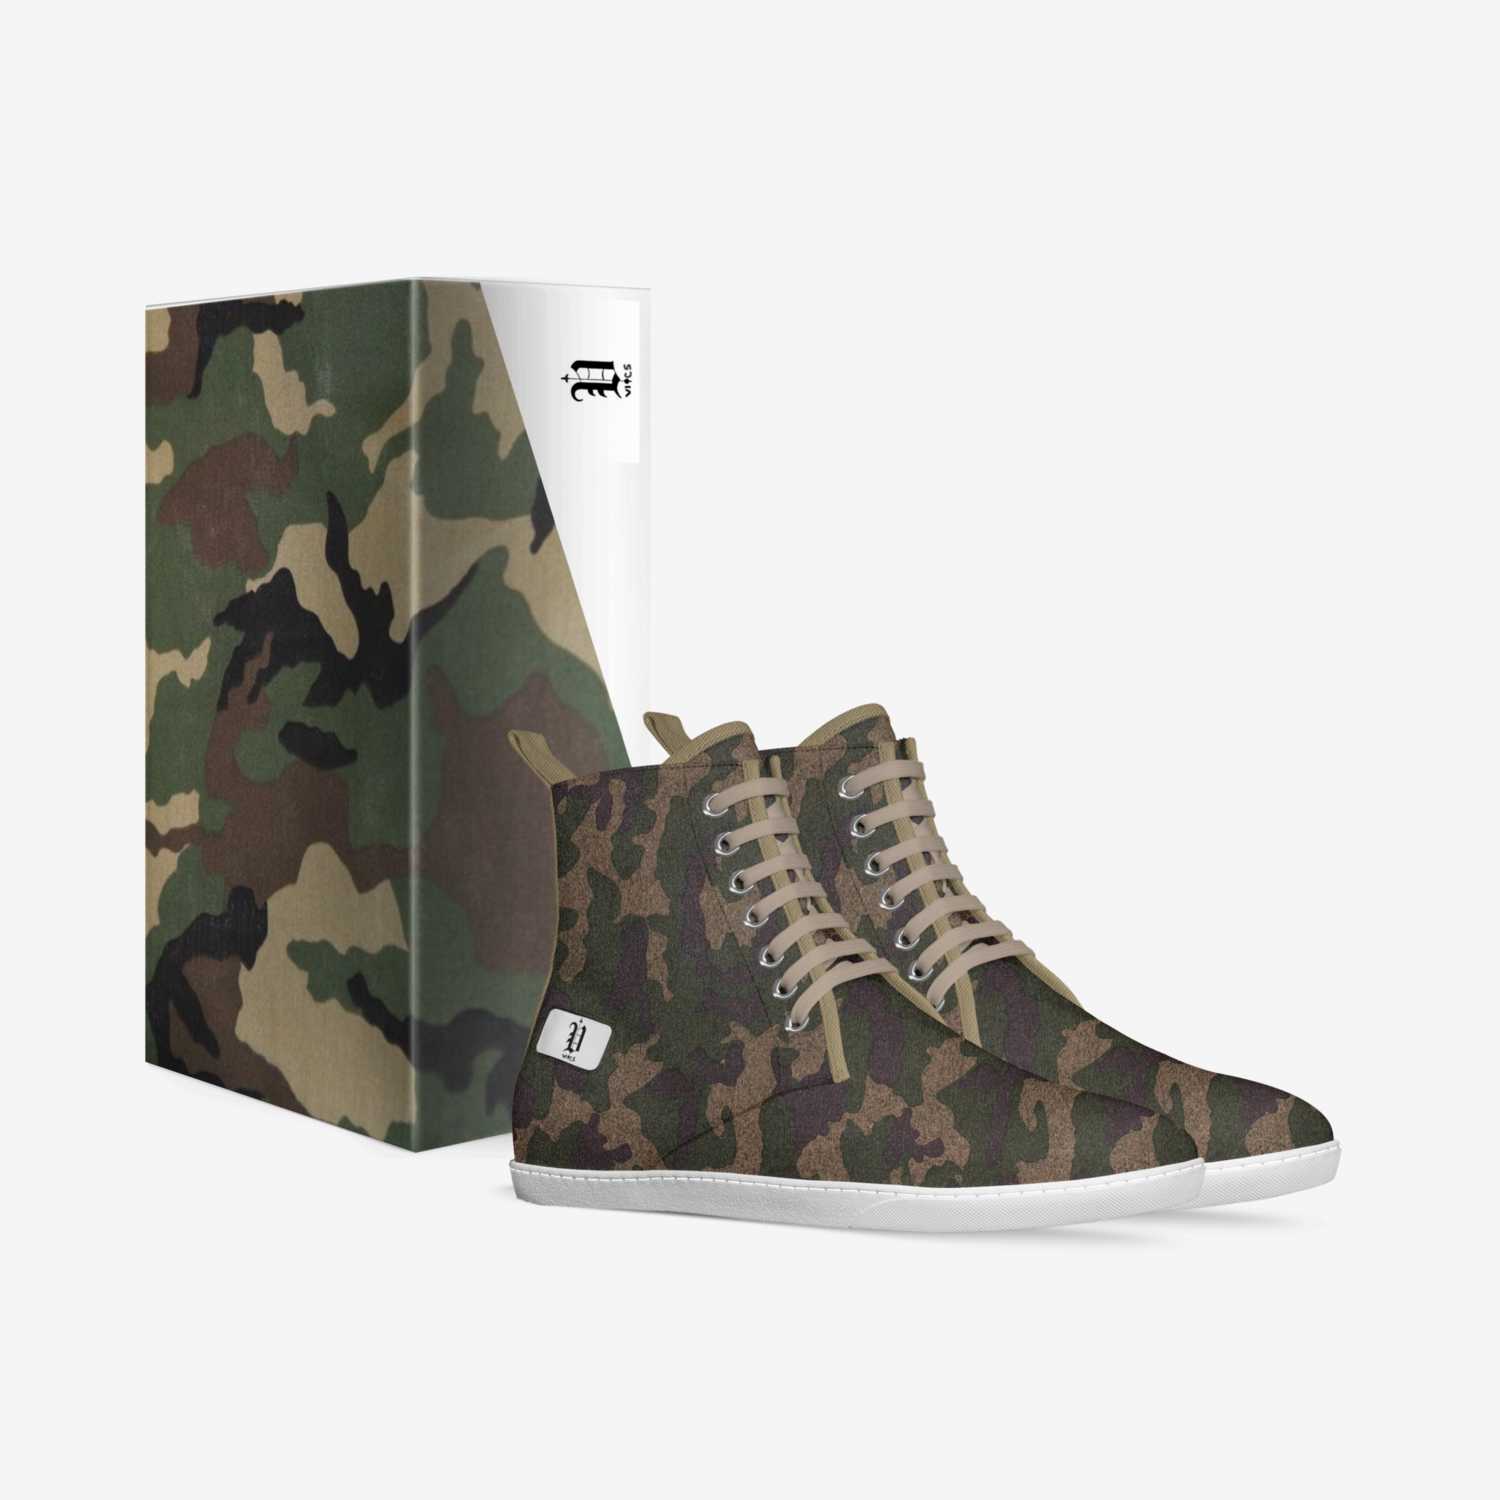 vics desert army custom made in Italy shoes by Brayden Murphy | Box view